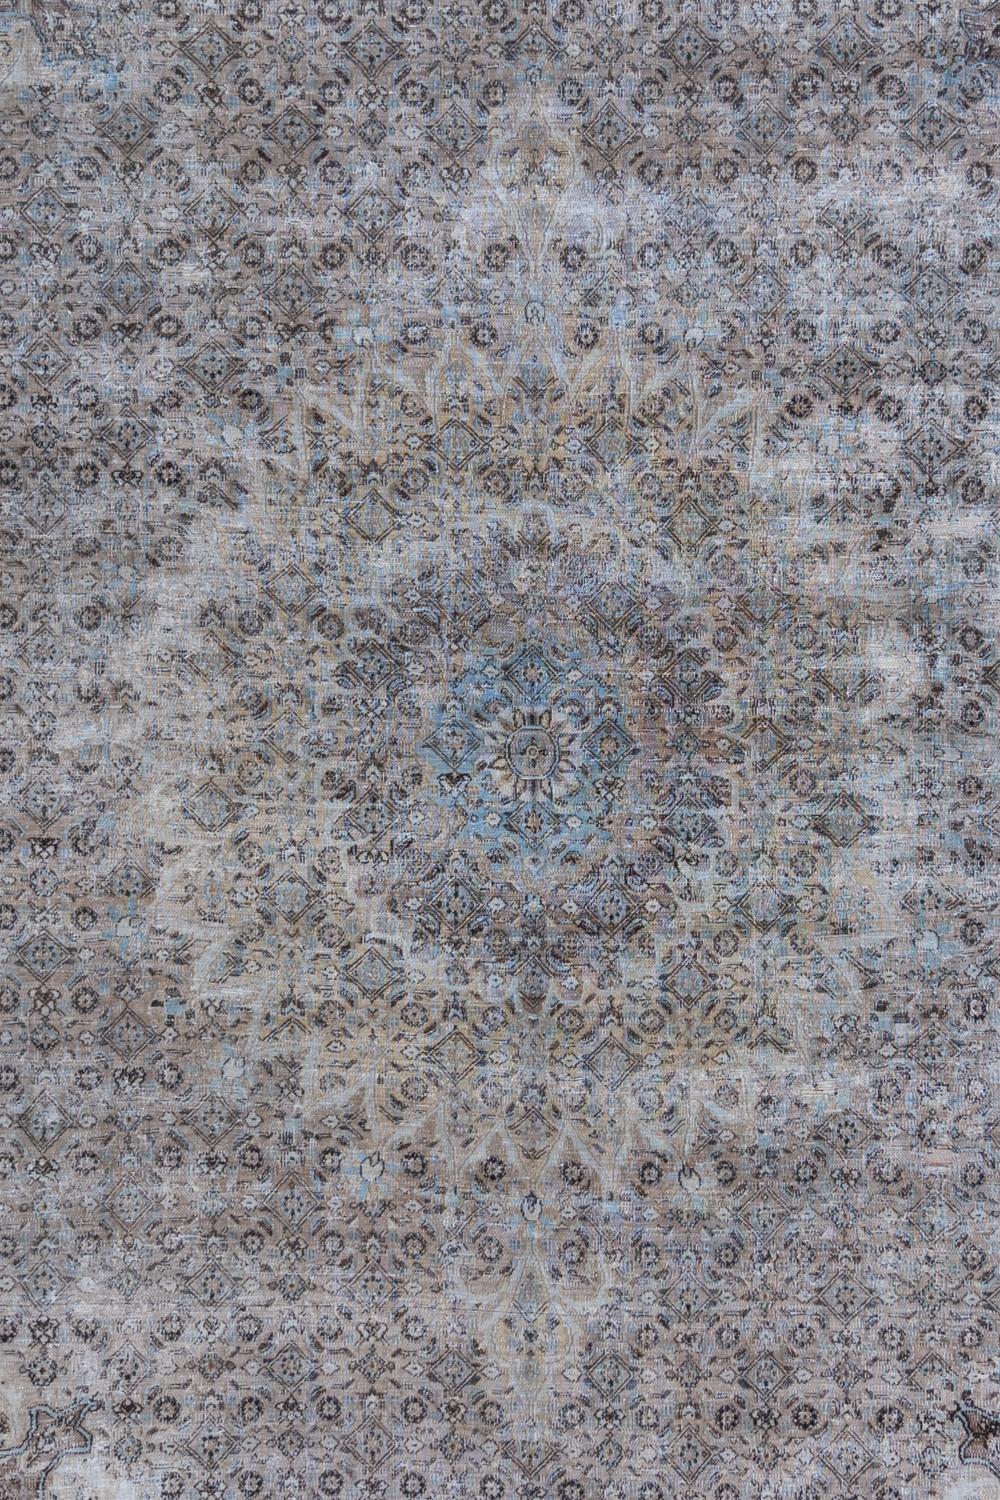 Age: Circa 1940

Colors: tan, blue, dark blue, brown 

Pile: low

Wear Notes: 4

Material: wool on cotton

Lovely textural vintage Persian Doroksh with subdued earthy colors. Good condition and safe for high traffic areas. This rug is a